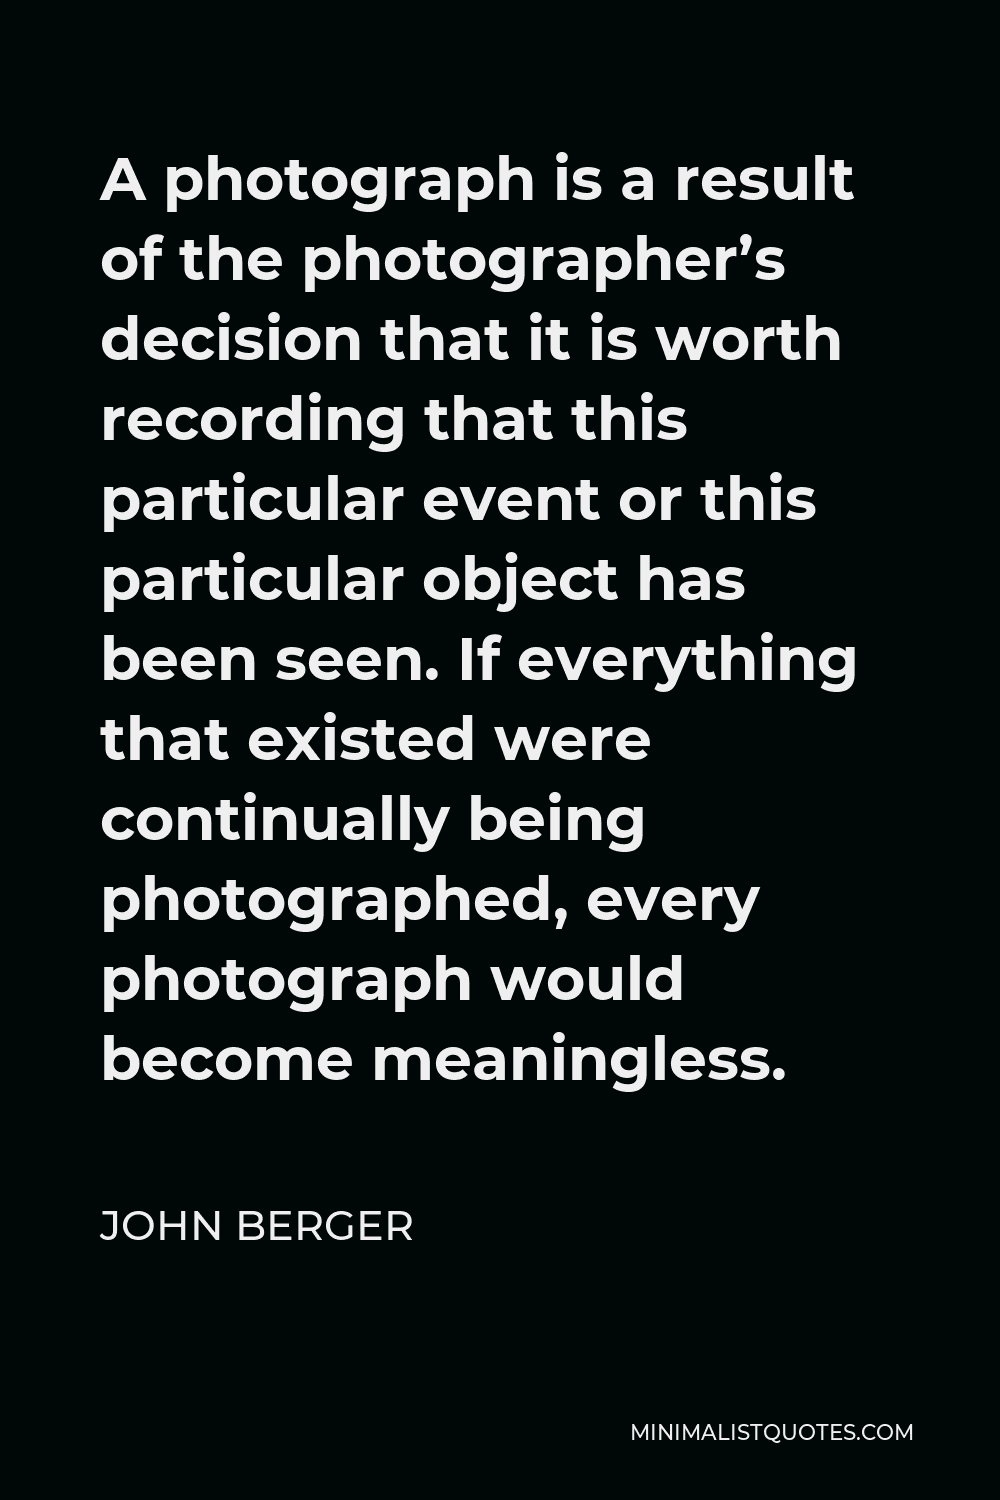 John Berger Quote - A photograph is a result of the photographer’s decision that it is worth recording that this particular event or this particular object has been seen. If everything that existed were continually being photographed, every photograph would become meaningless.